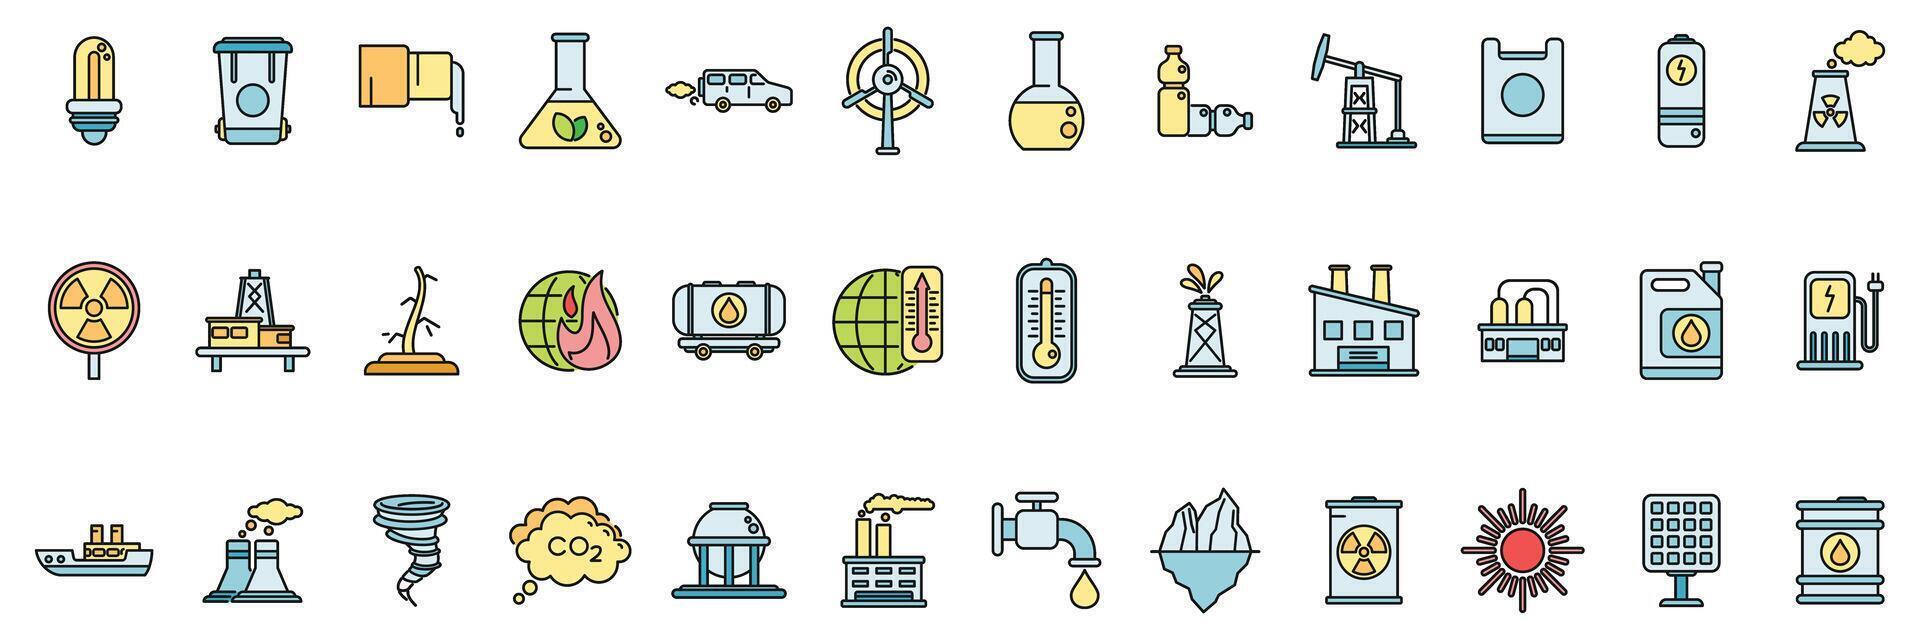 Global warming icons set vector color